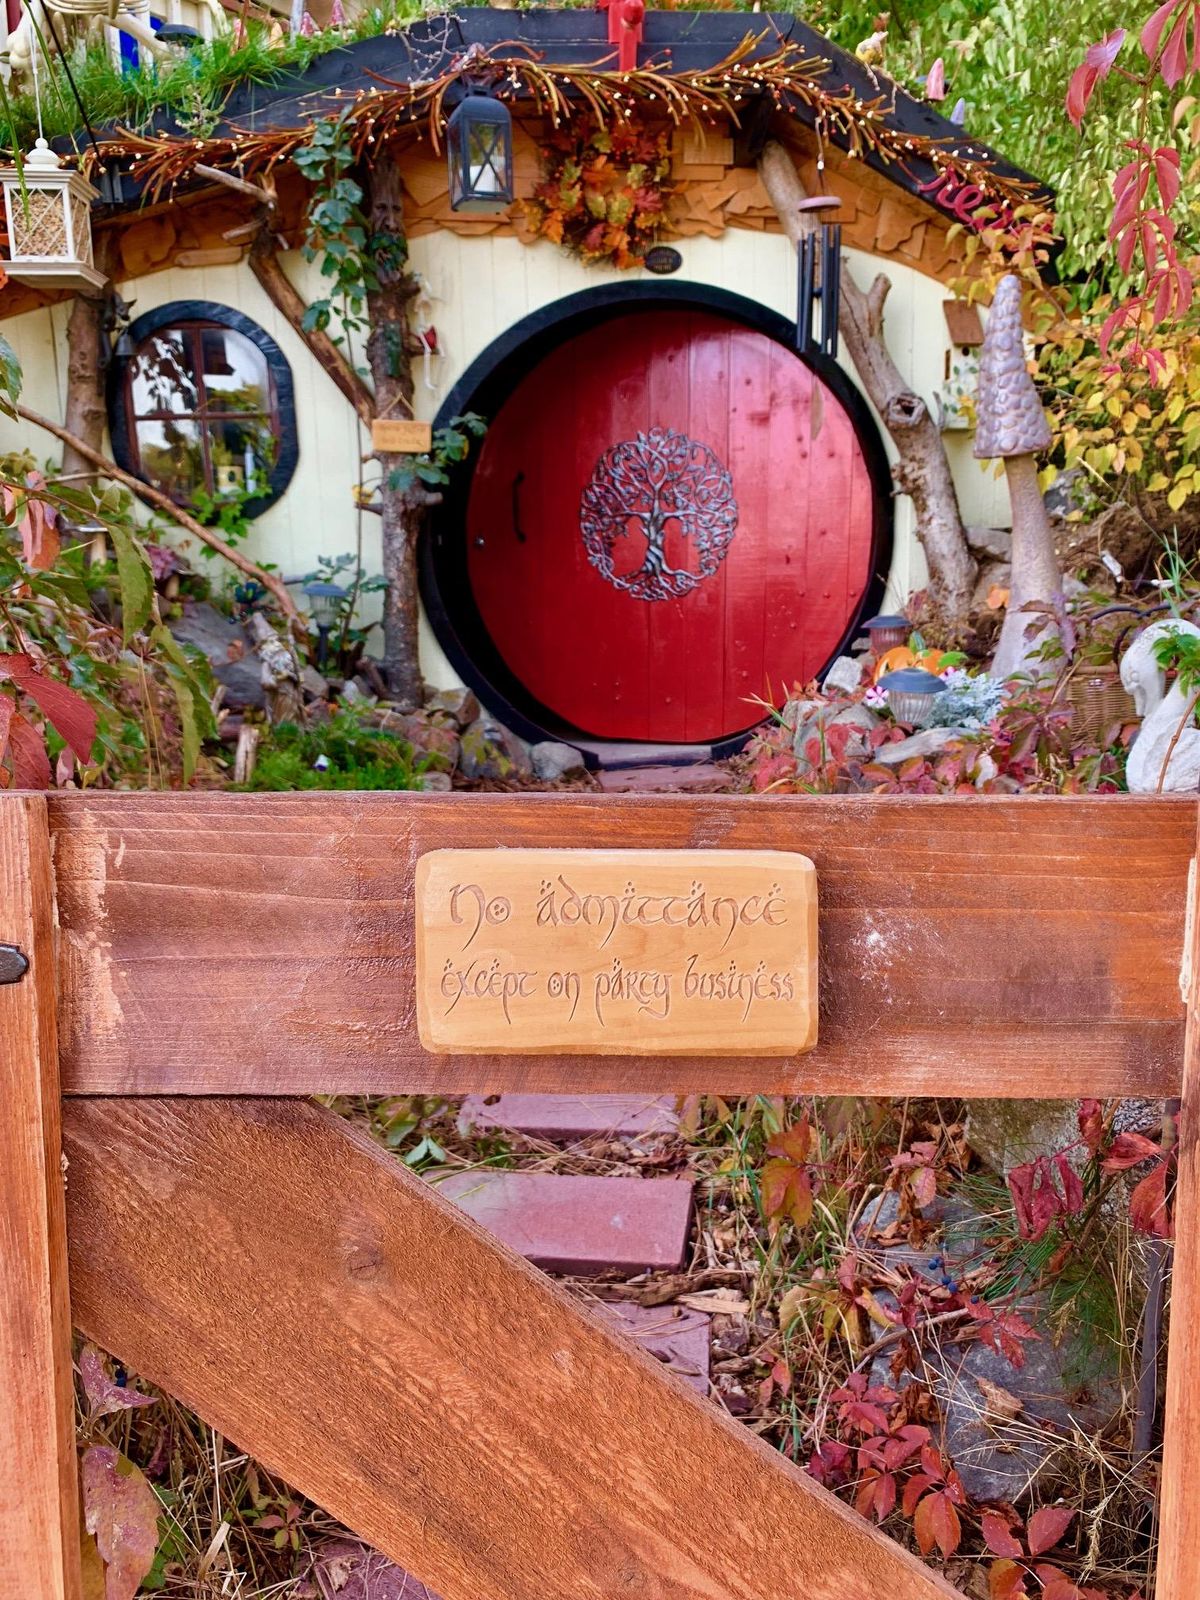 The yard around the Hobbit house is filled  with Hobbit-themed decorations. (Courtesy of Ryan Oelrich)